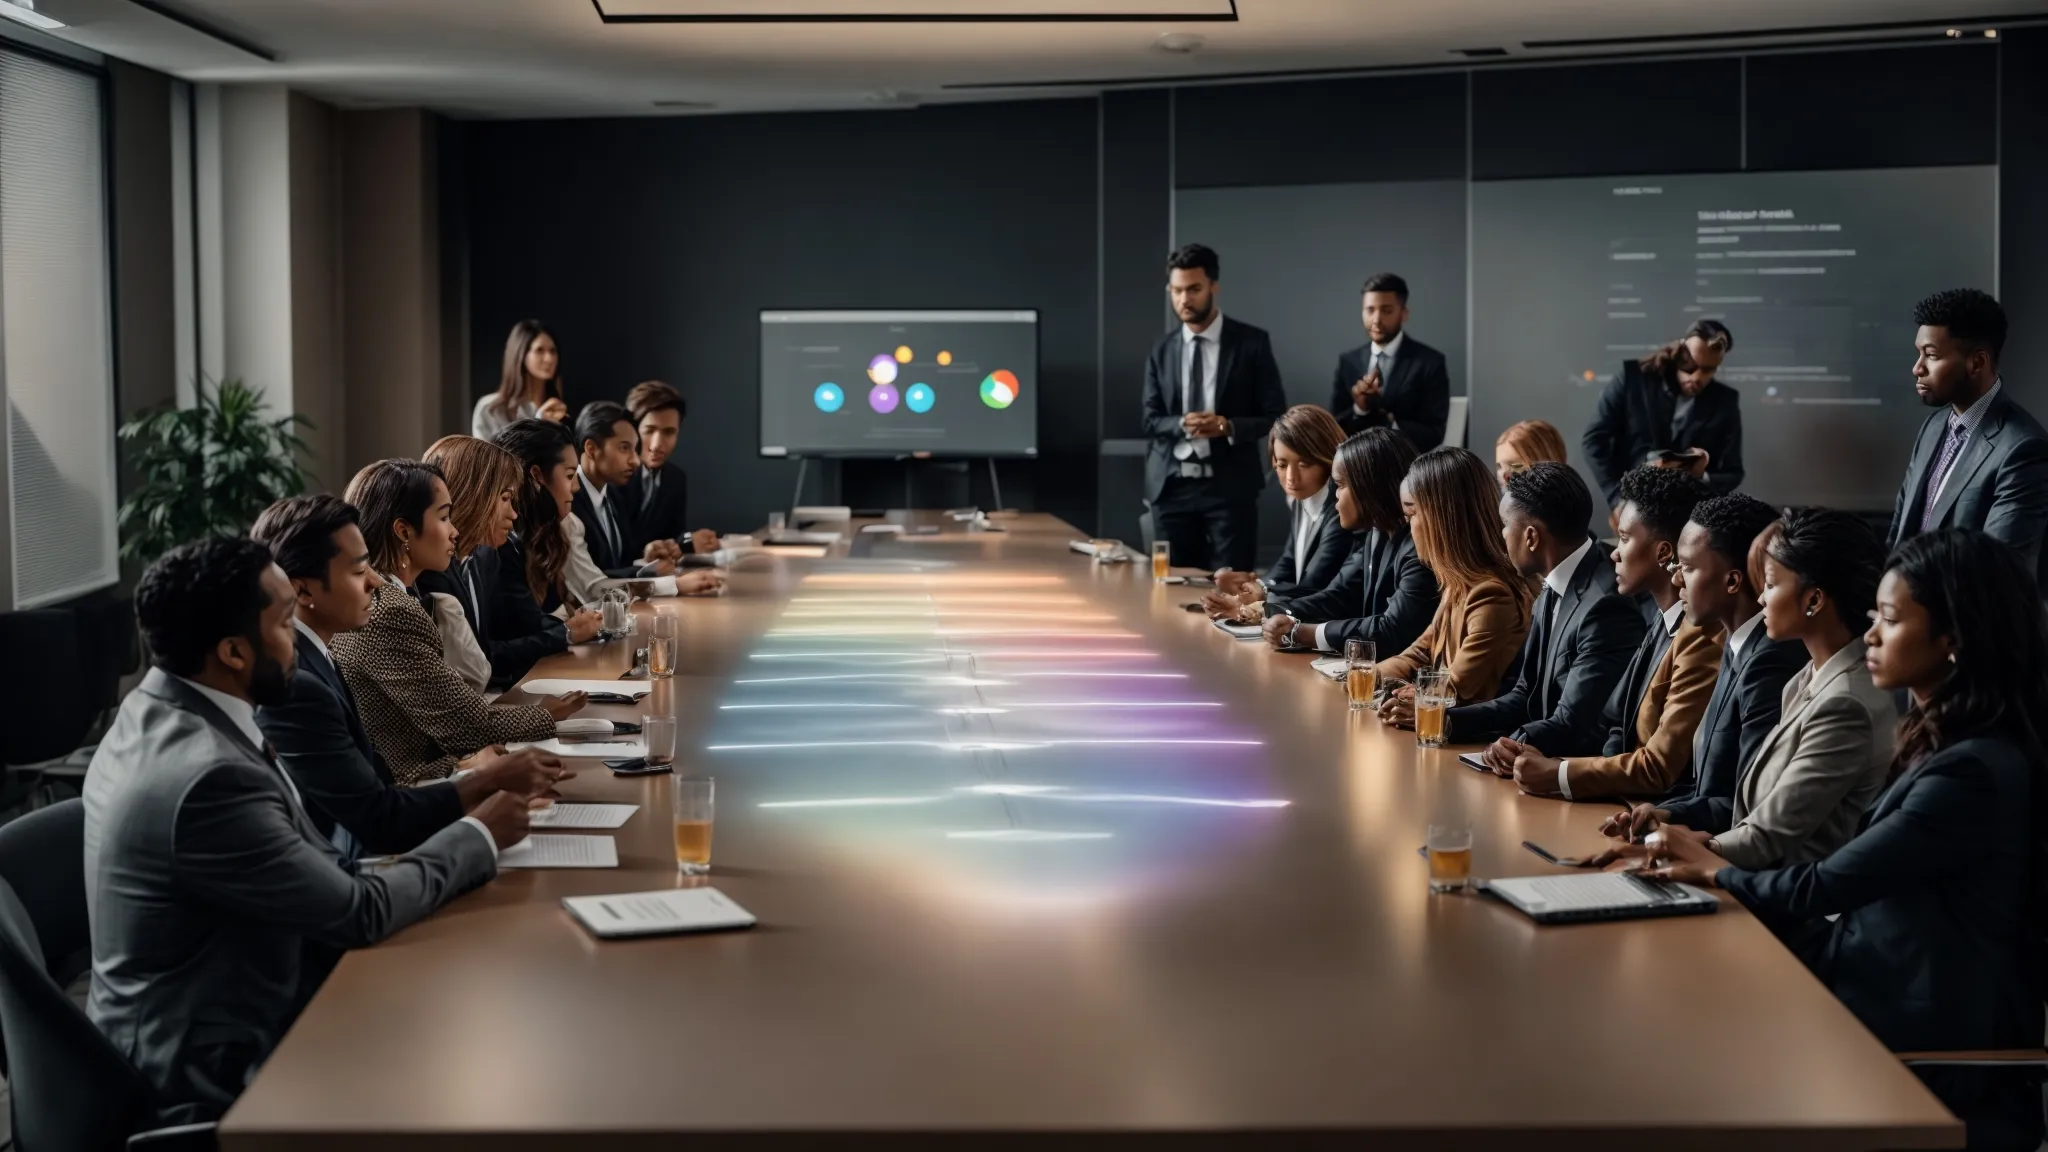 a diverse group of professionals gathers around a sleek, modern conference table, examining a bright, projected infographic illustrating a comparison of top crm platforms.